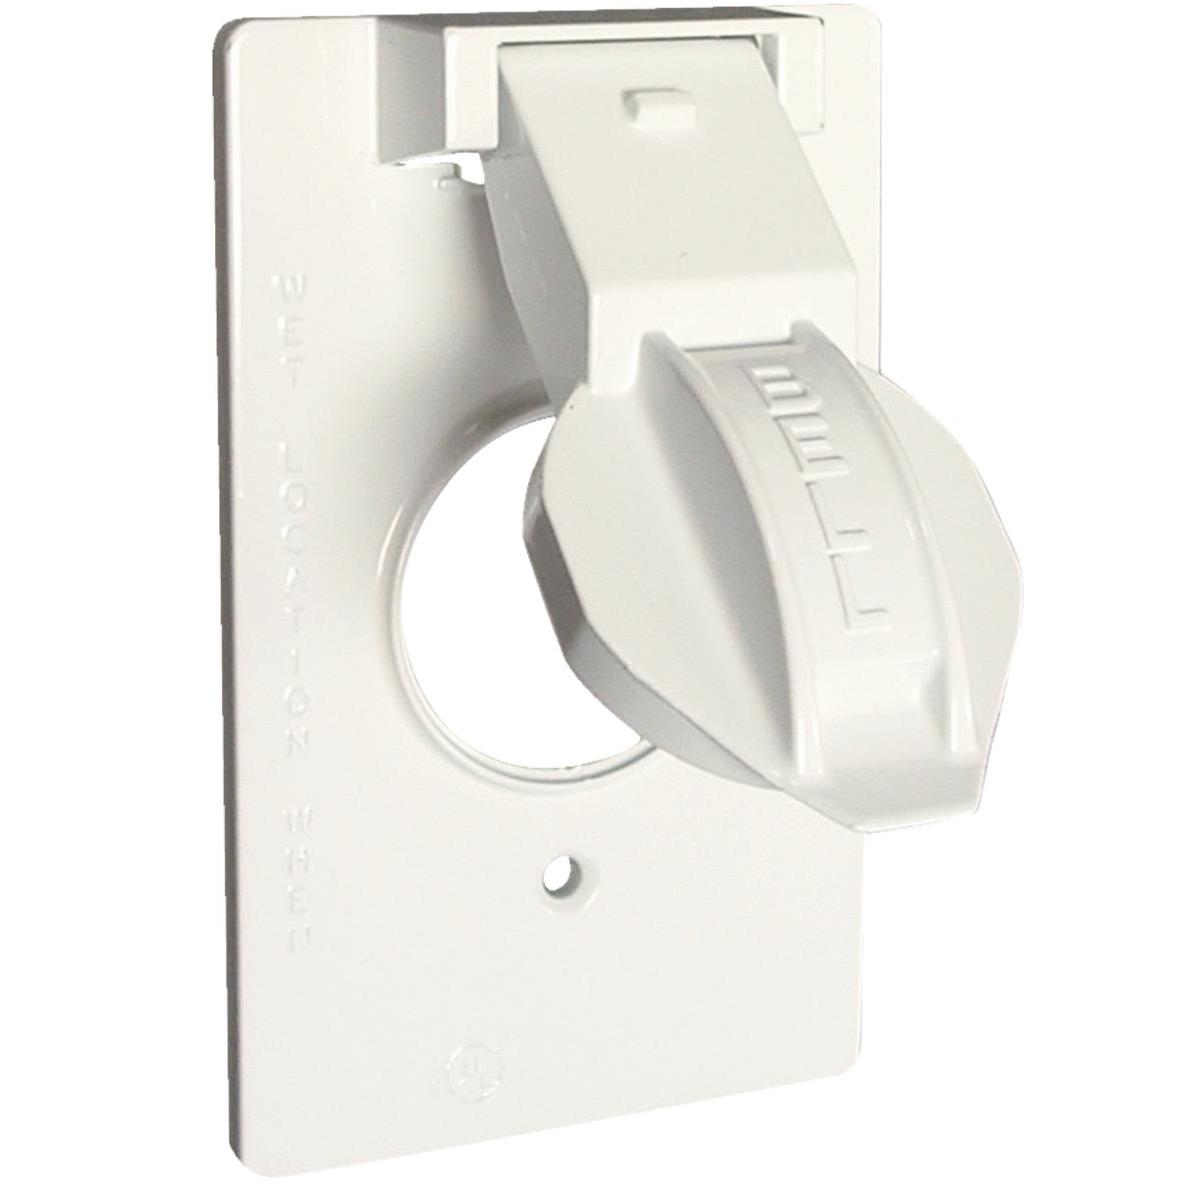 Hubbell 2-Gang Vertical Mount Non-Metallic In-Use Outdoor Outlet